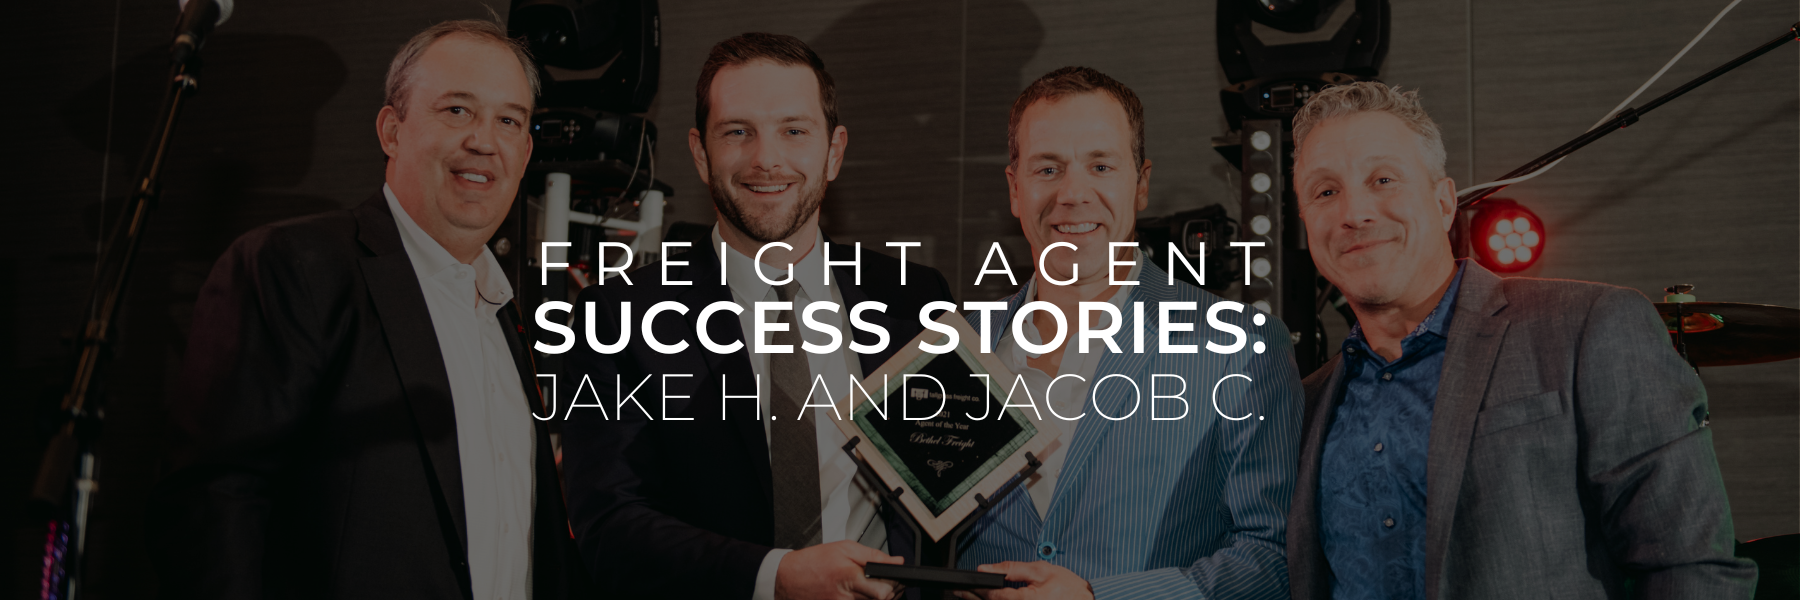 You are currently viewing Freight Agent Success Stories: Jake H. and Jacob C.